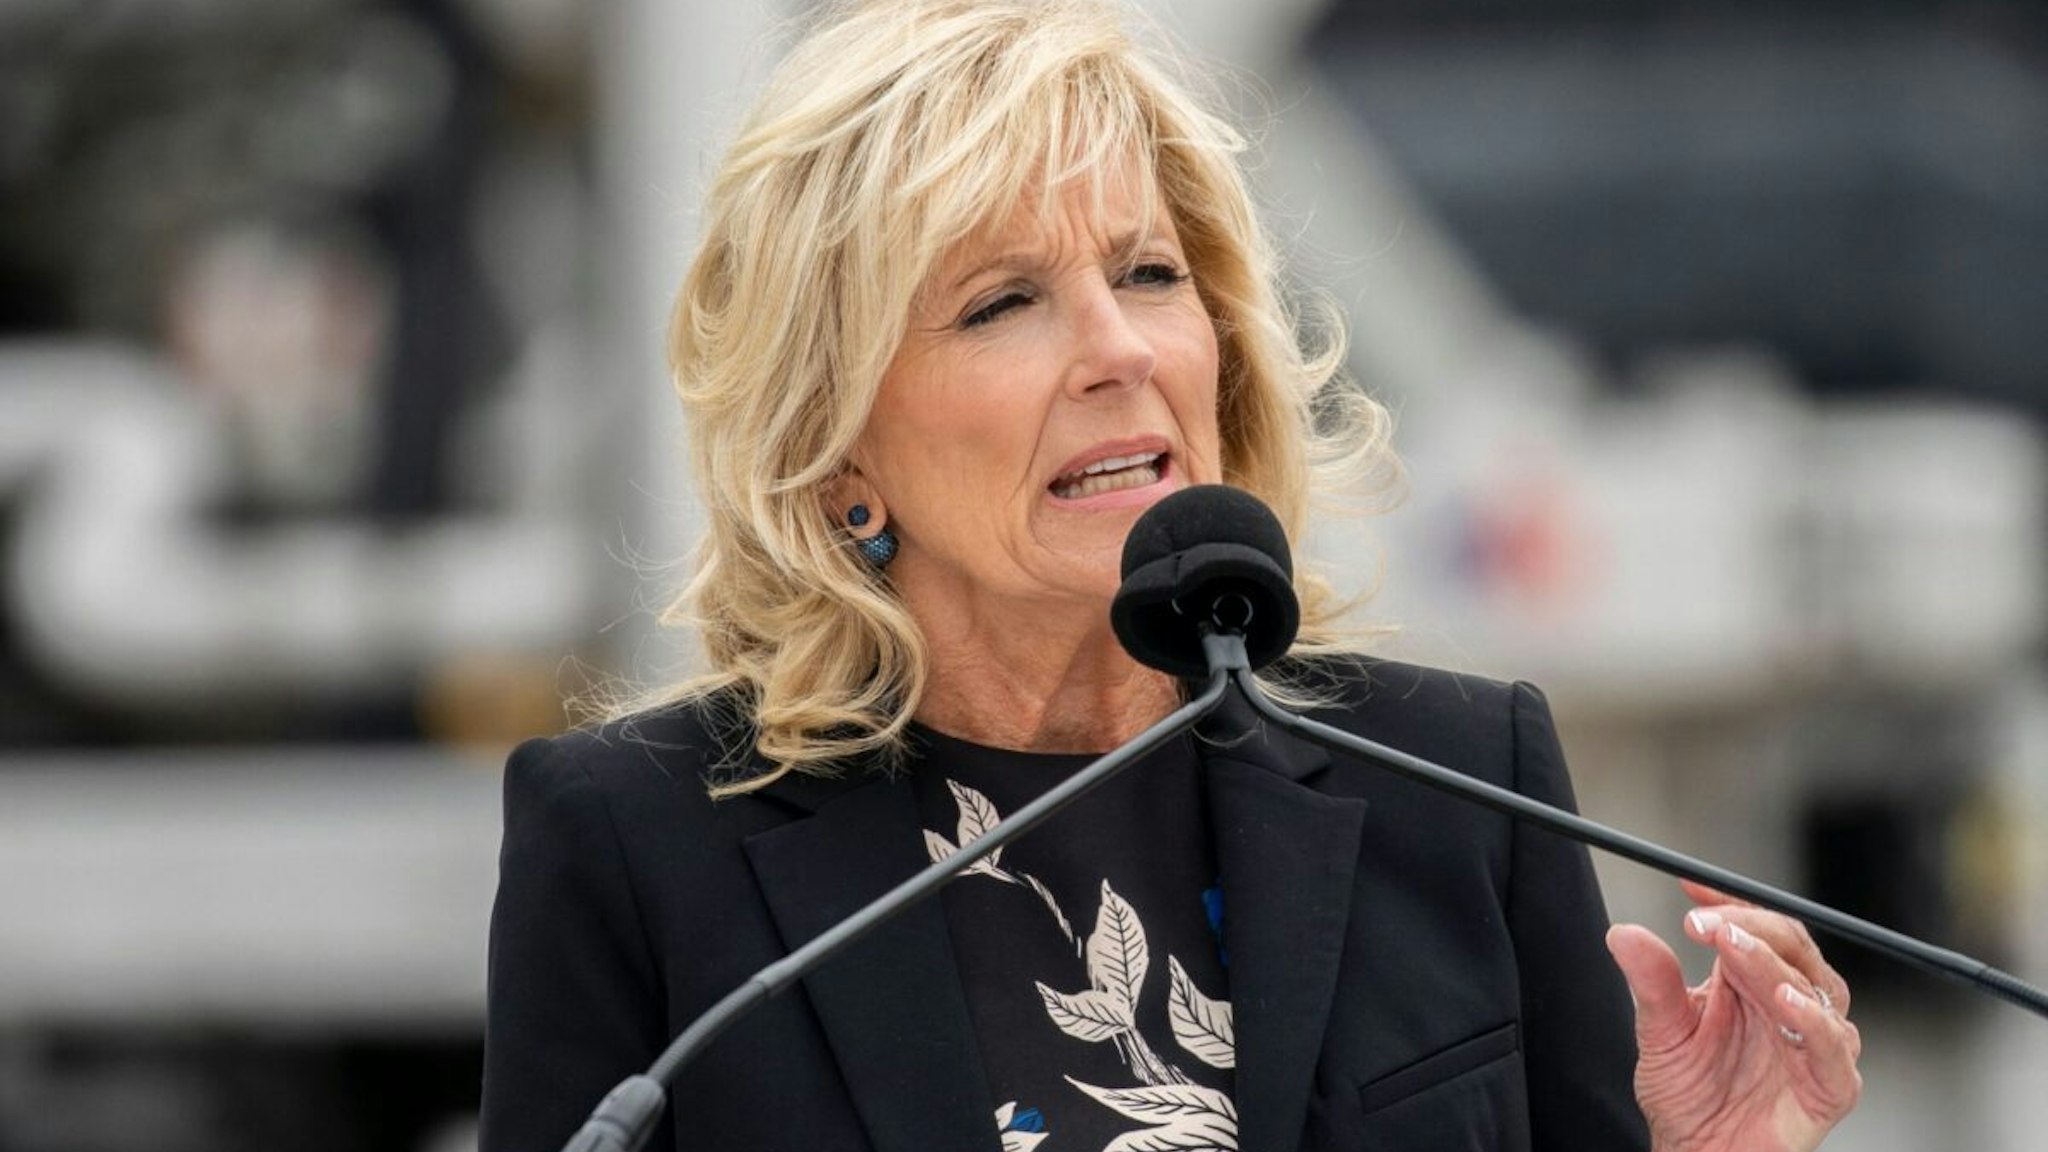 US First Lady Jill Biden delivers remarks after a shipment of infant formula, sent in through Operation Fly Formula, arrived at Dulles International Airport in Dulles, Virginia, on May 25, 2022.